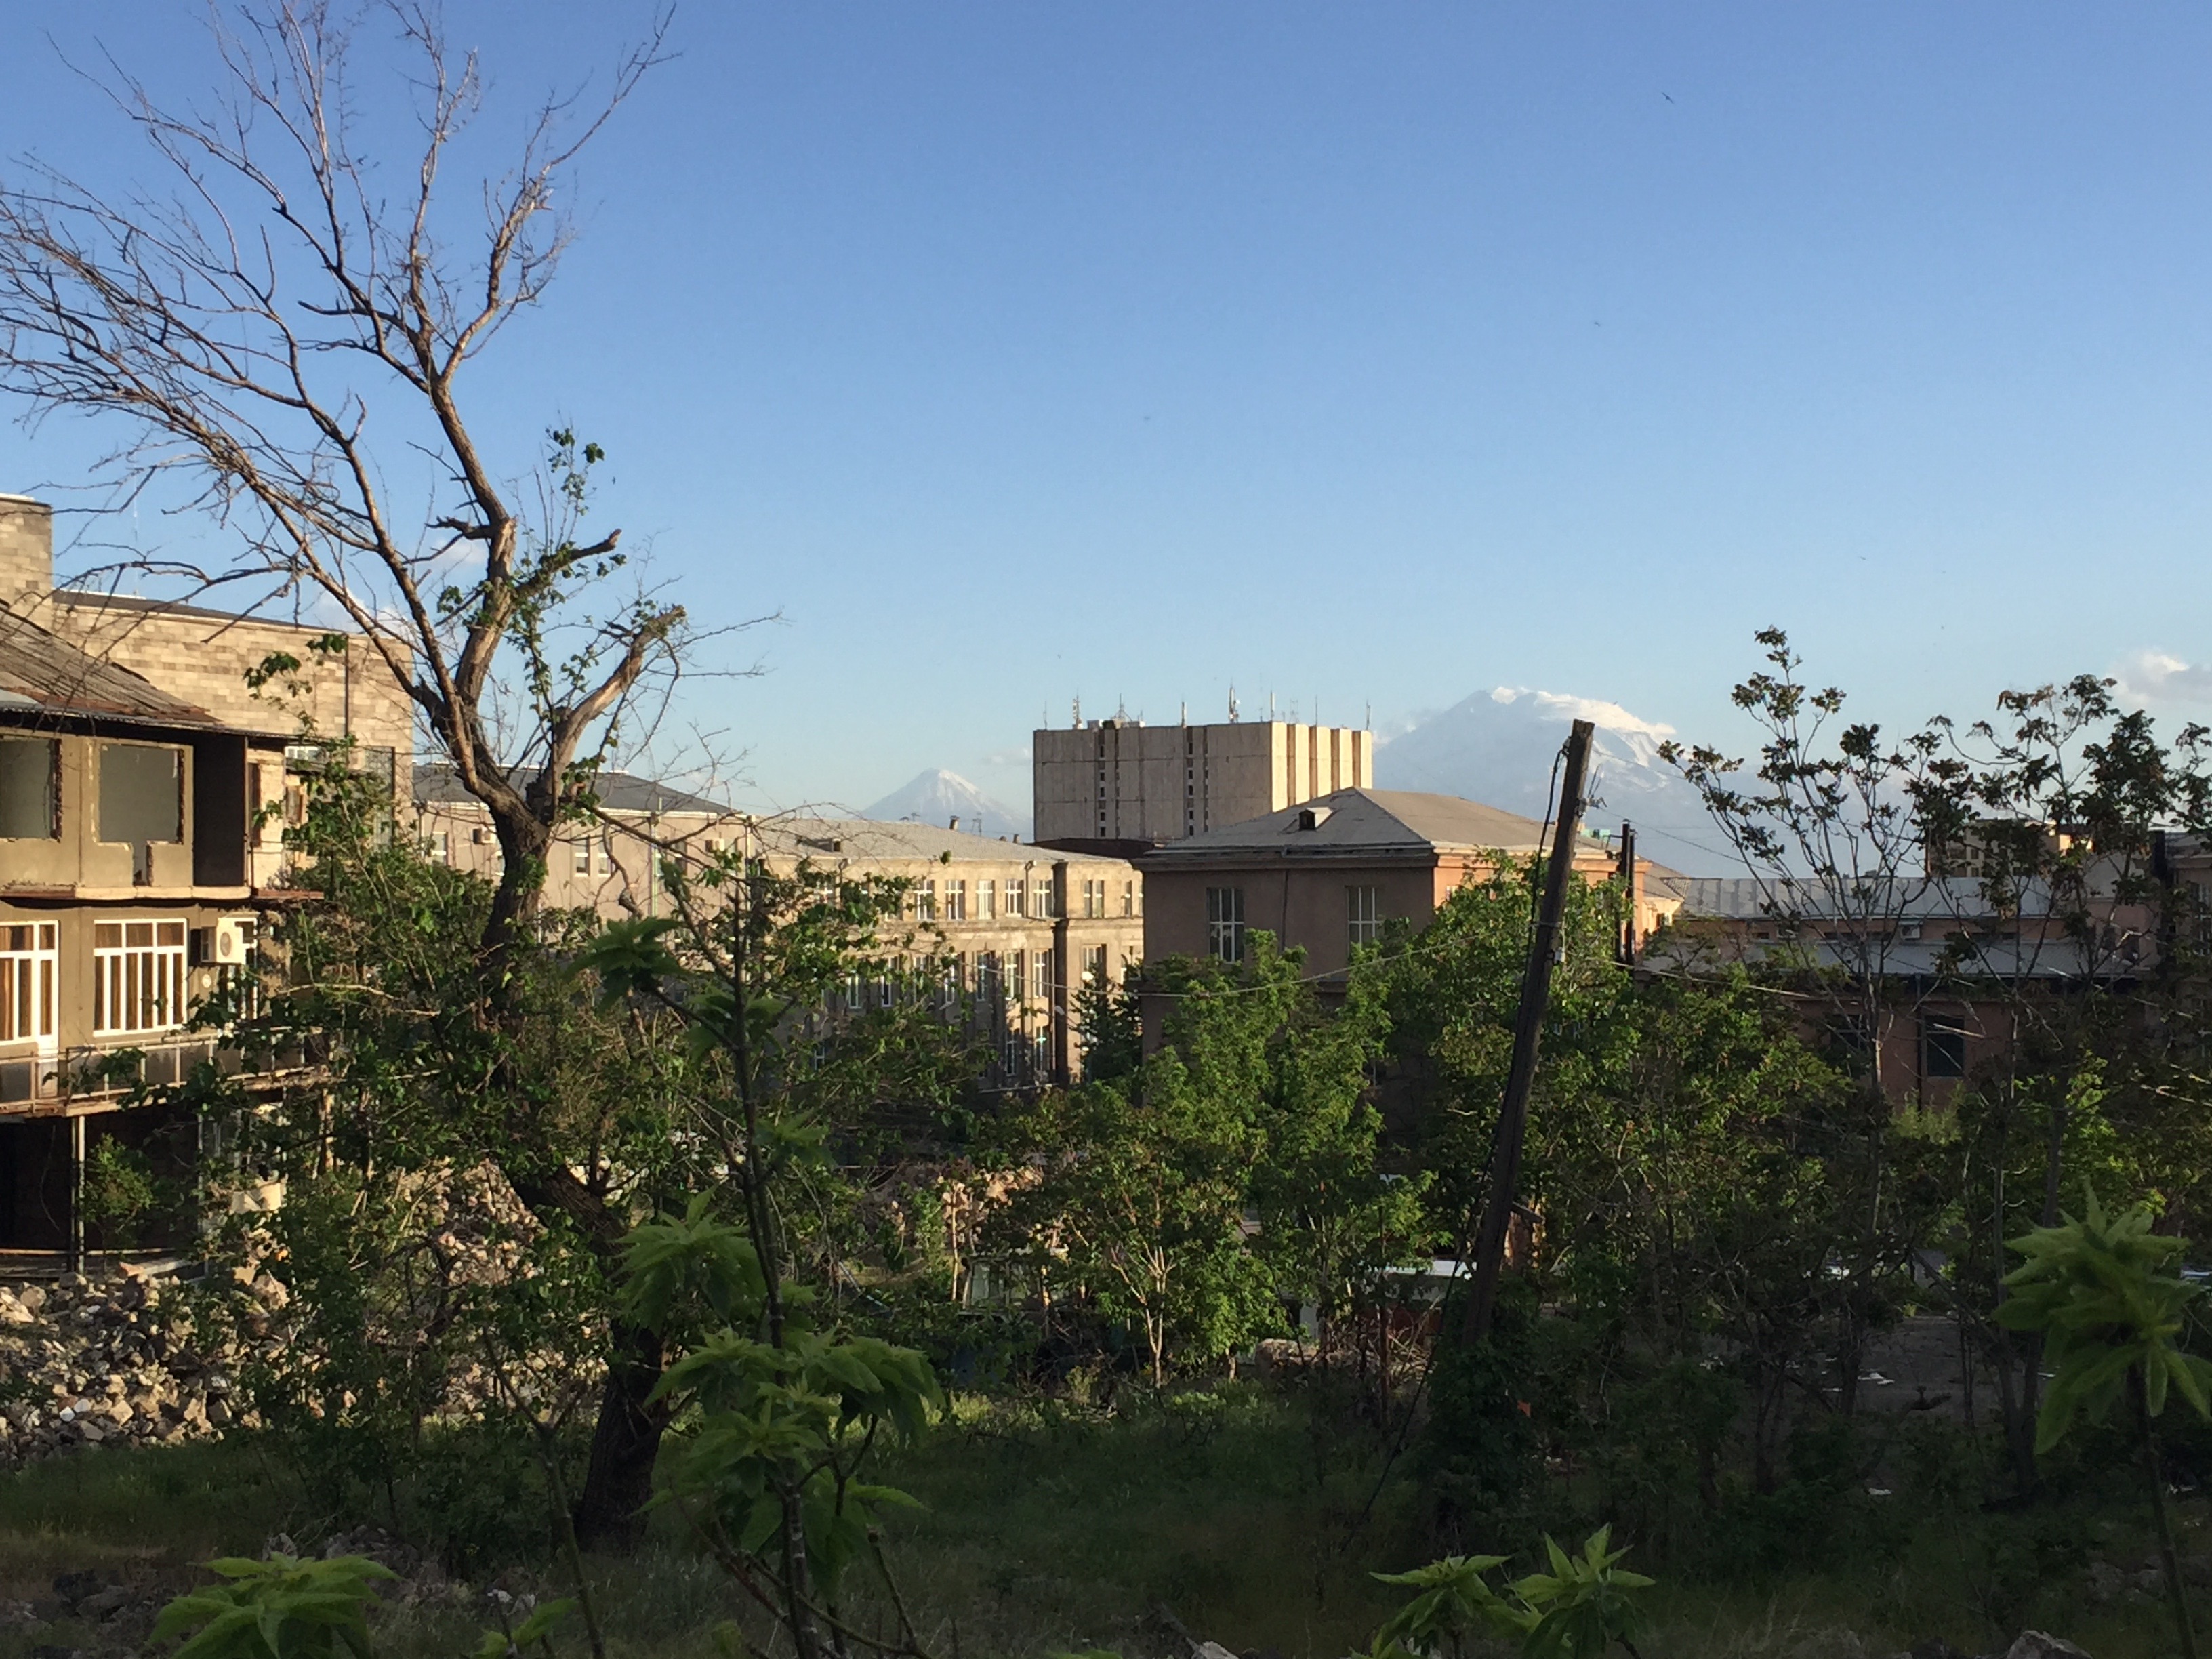 Yerevan from the back